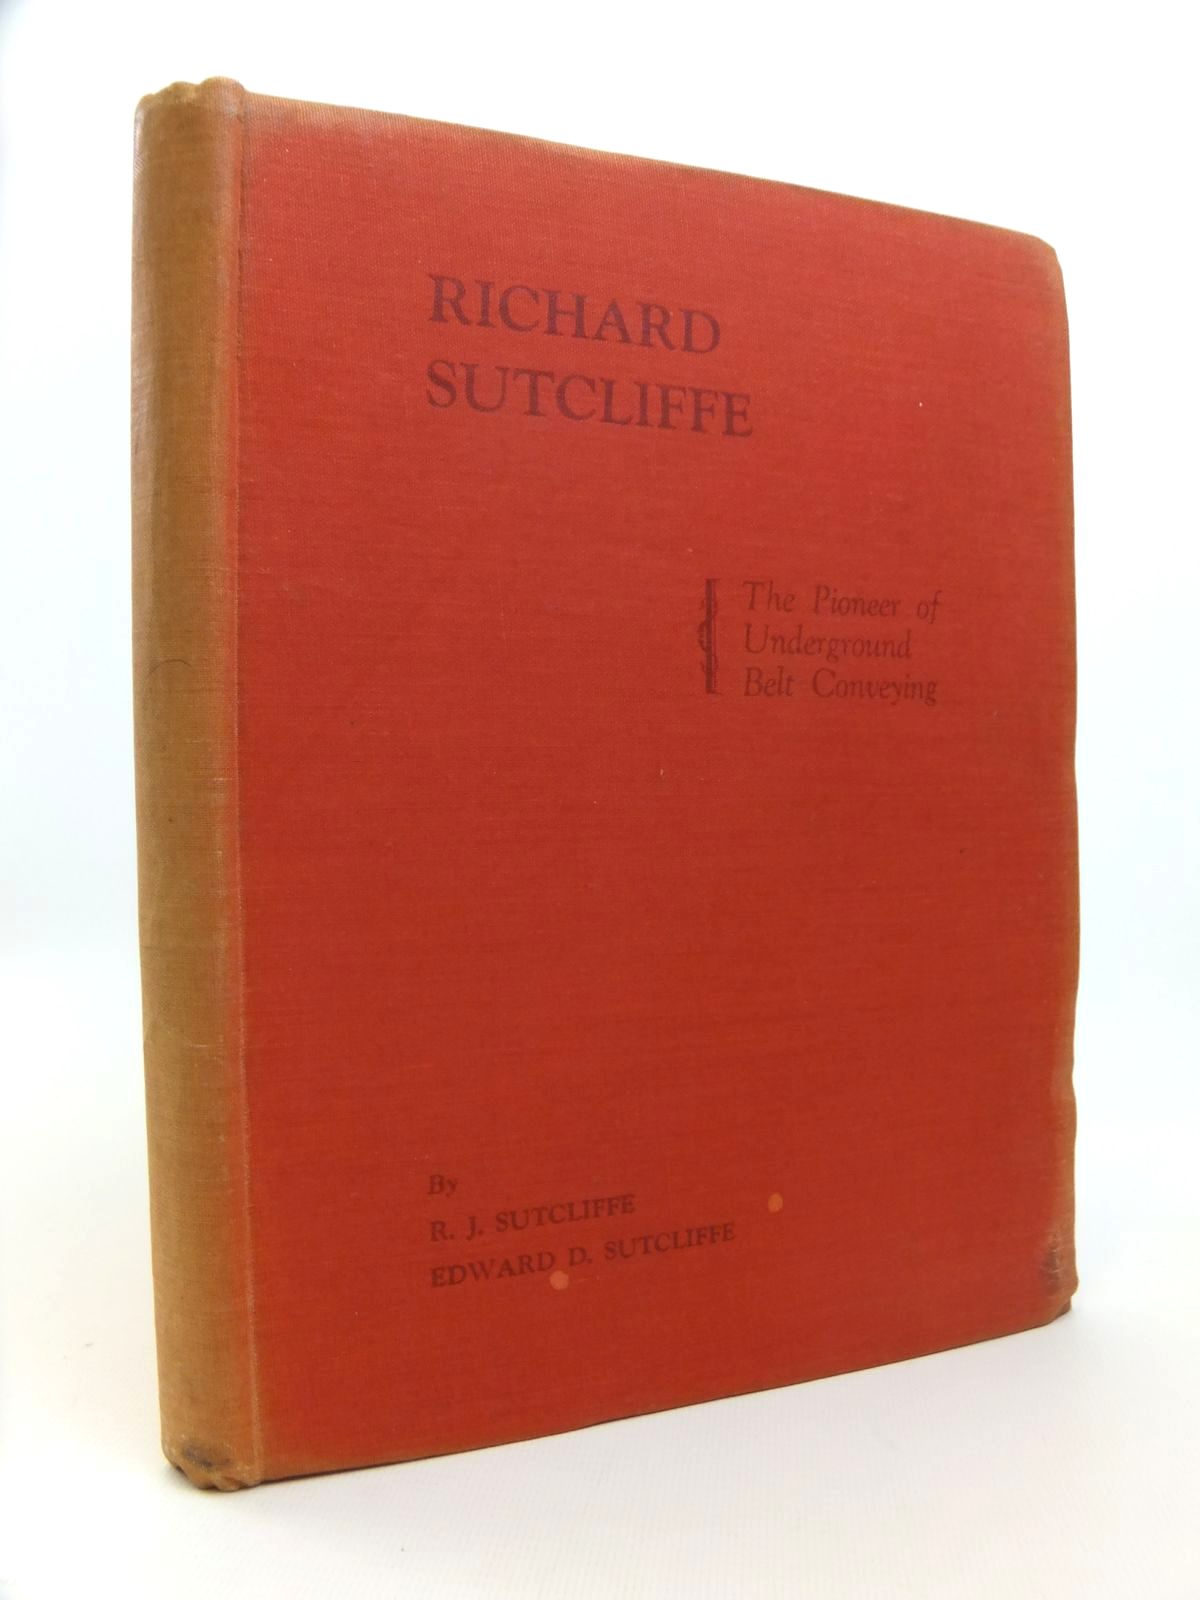 Photo of RICHARD SUTCLIFFE: THE PIONEER OF UNDERGROUND BELT CONVEYING written by Sutcliffe, R.J. Sutcliffe, Edward D. published by R.W. Simpson &amp; Co. Ltd. (STOCK CODE: 1812299)  for sale by Stella & Rose's Books